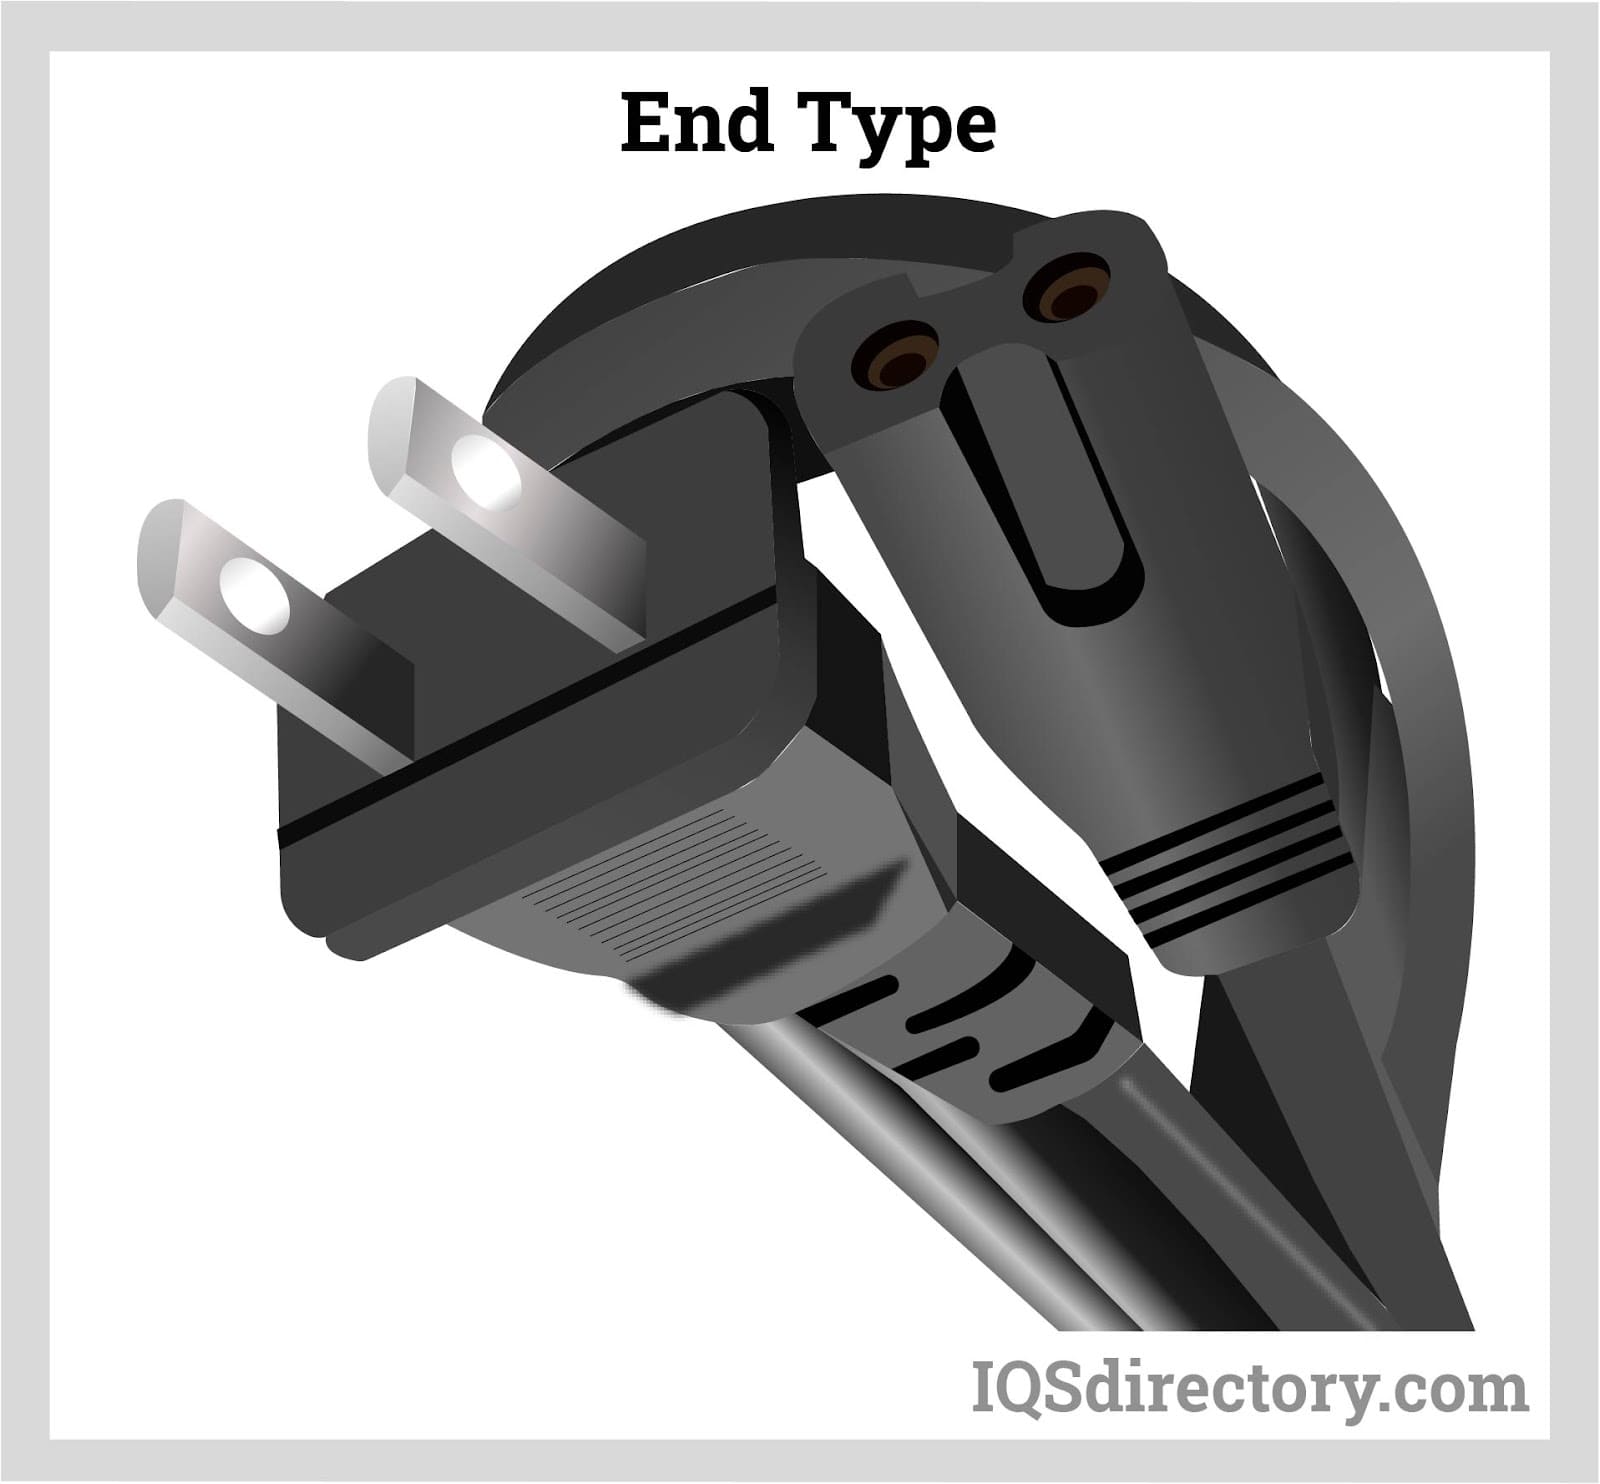  End Type